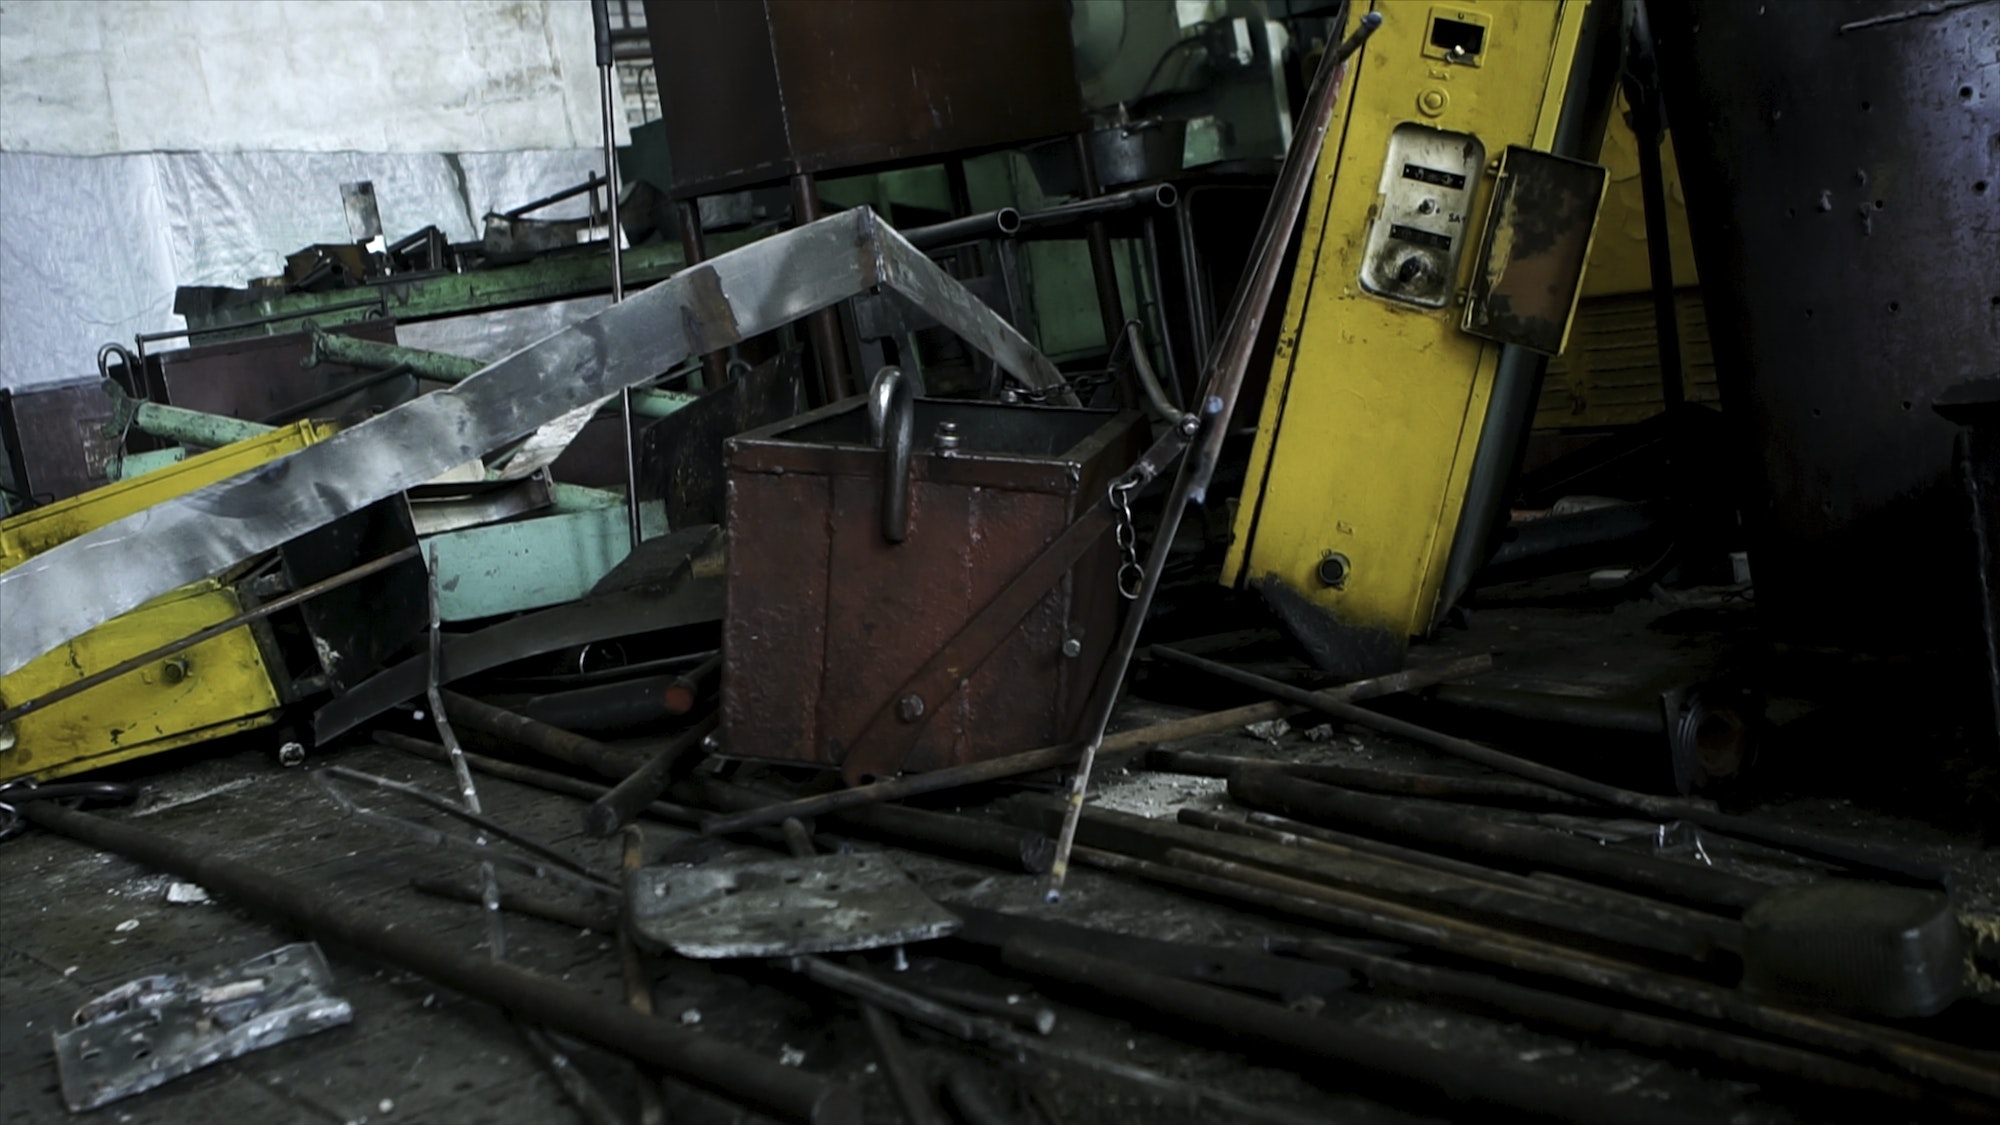 Abandoned old, useless details of machine tools in workshop, metal scrap. Many different parts of